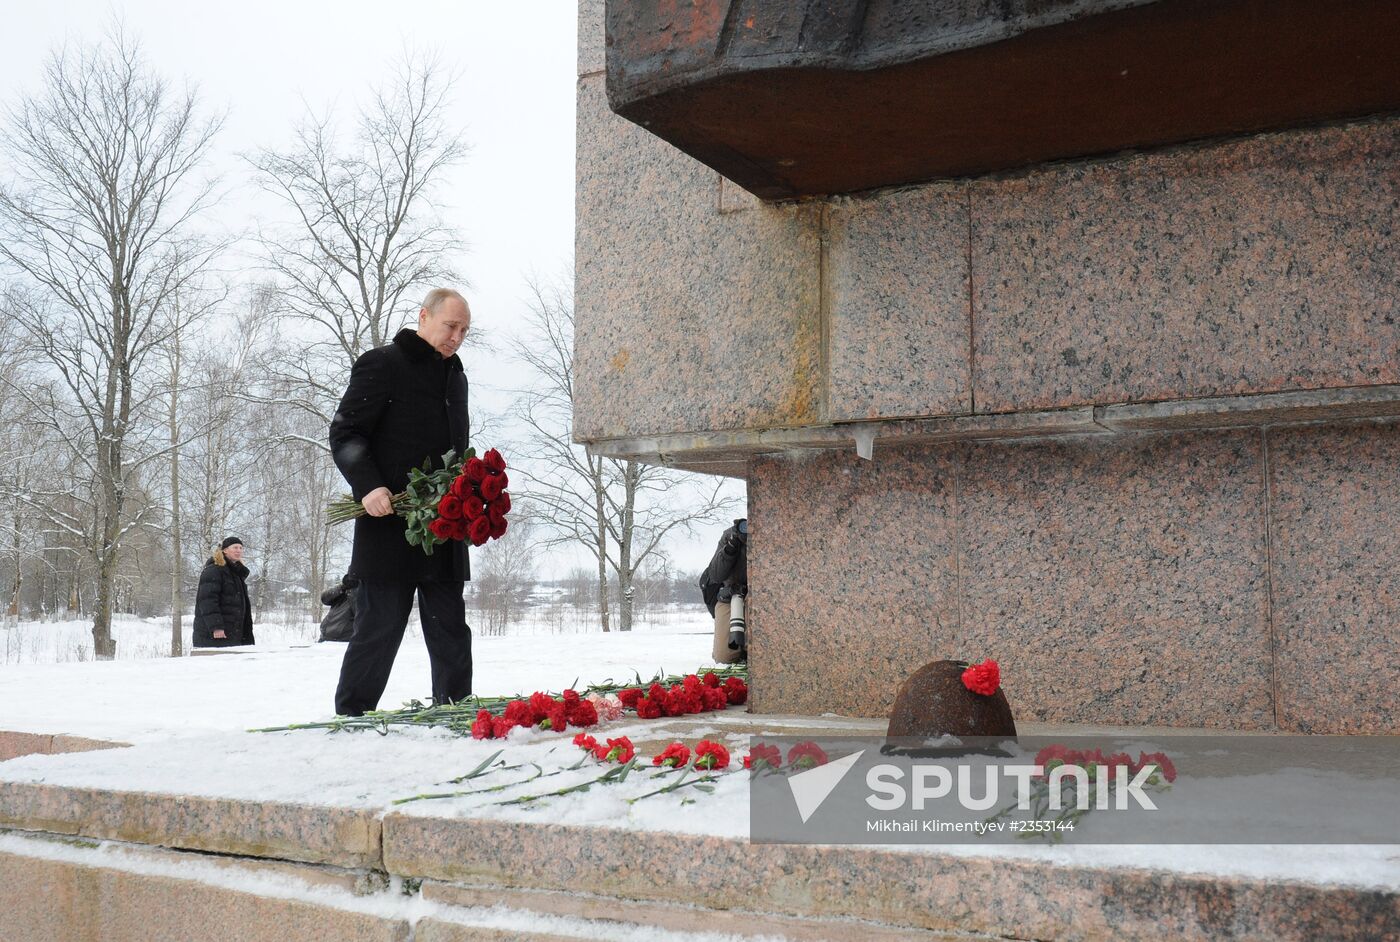 Putin attends ceremonies commemorating 70th anniversary of liberation of Leningrad from Nazi siege